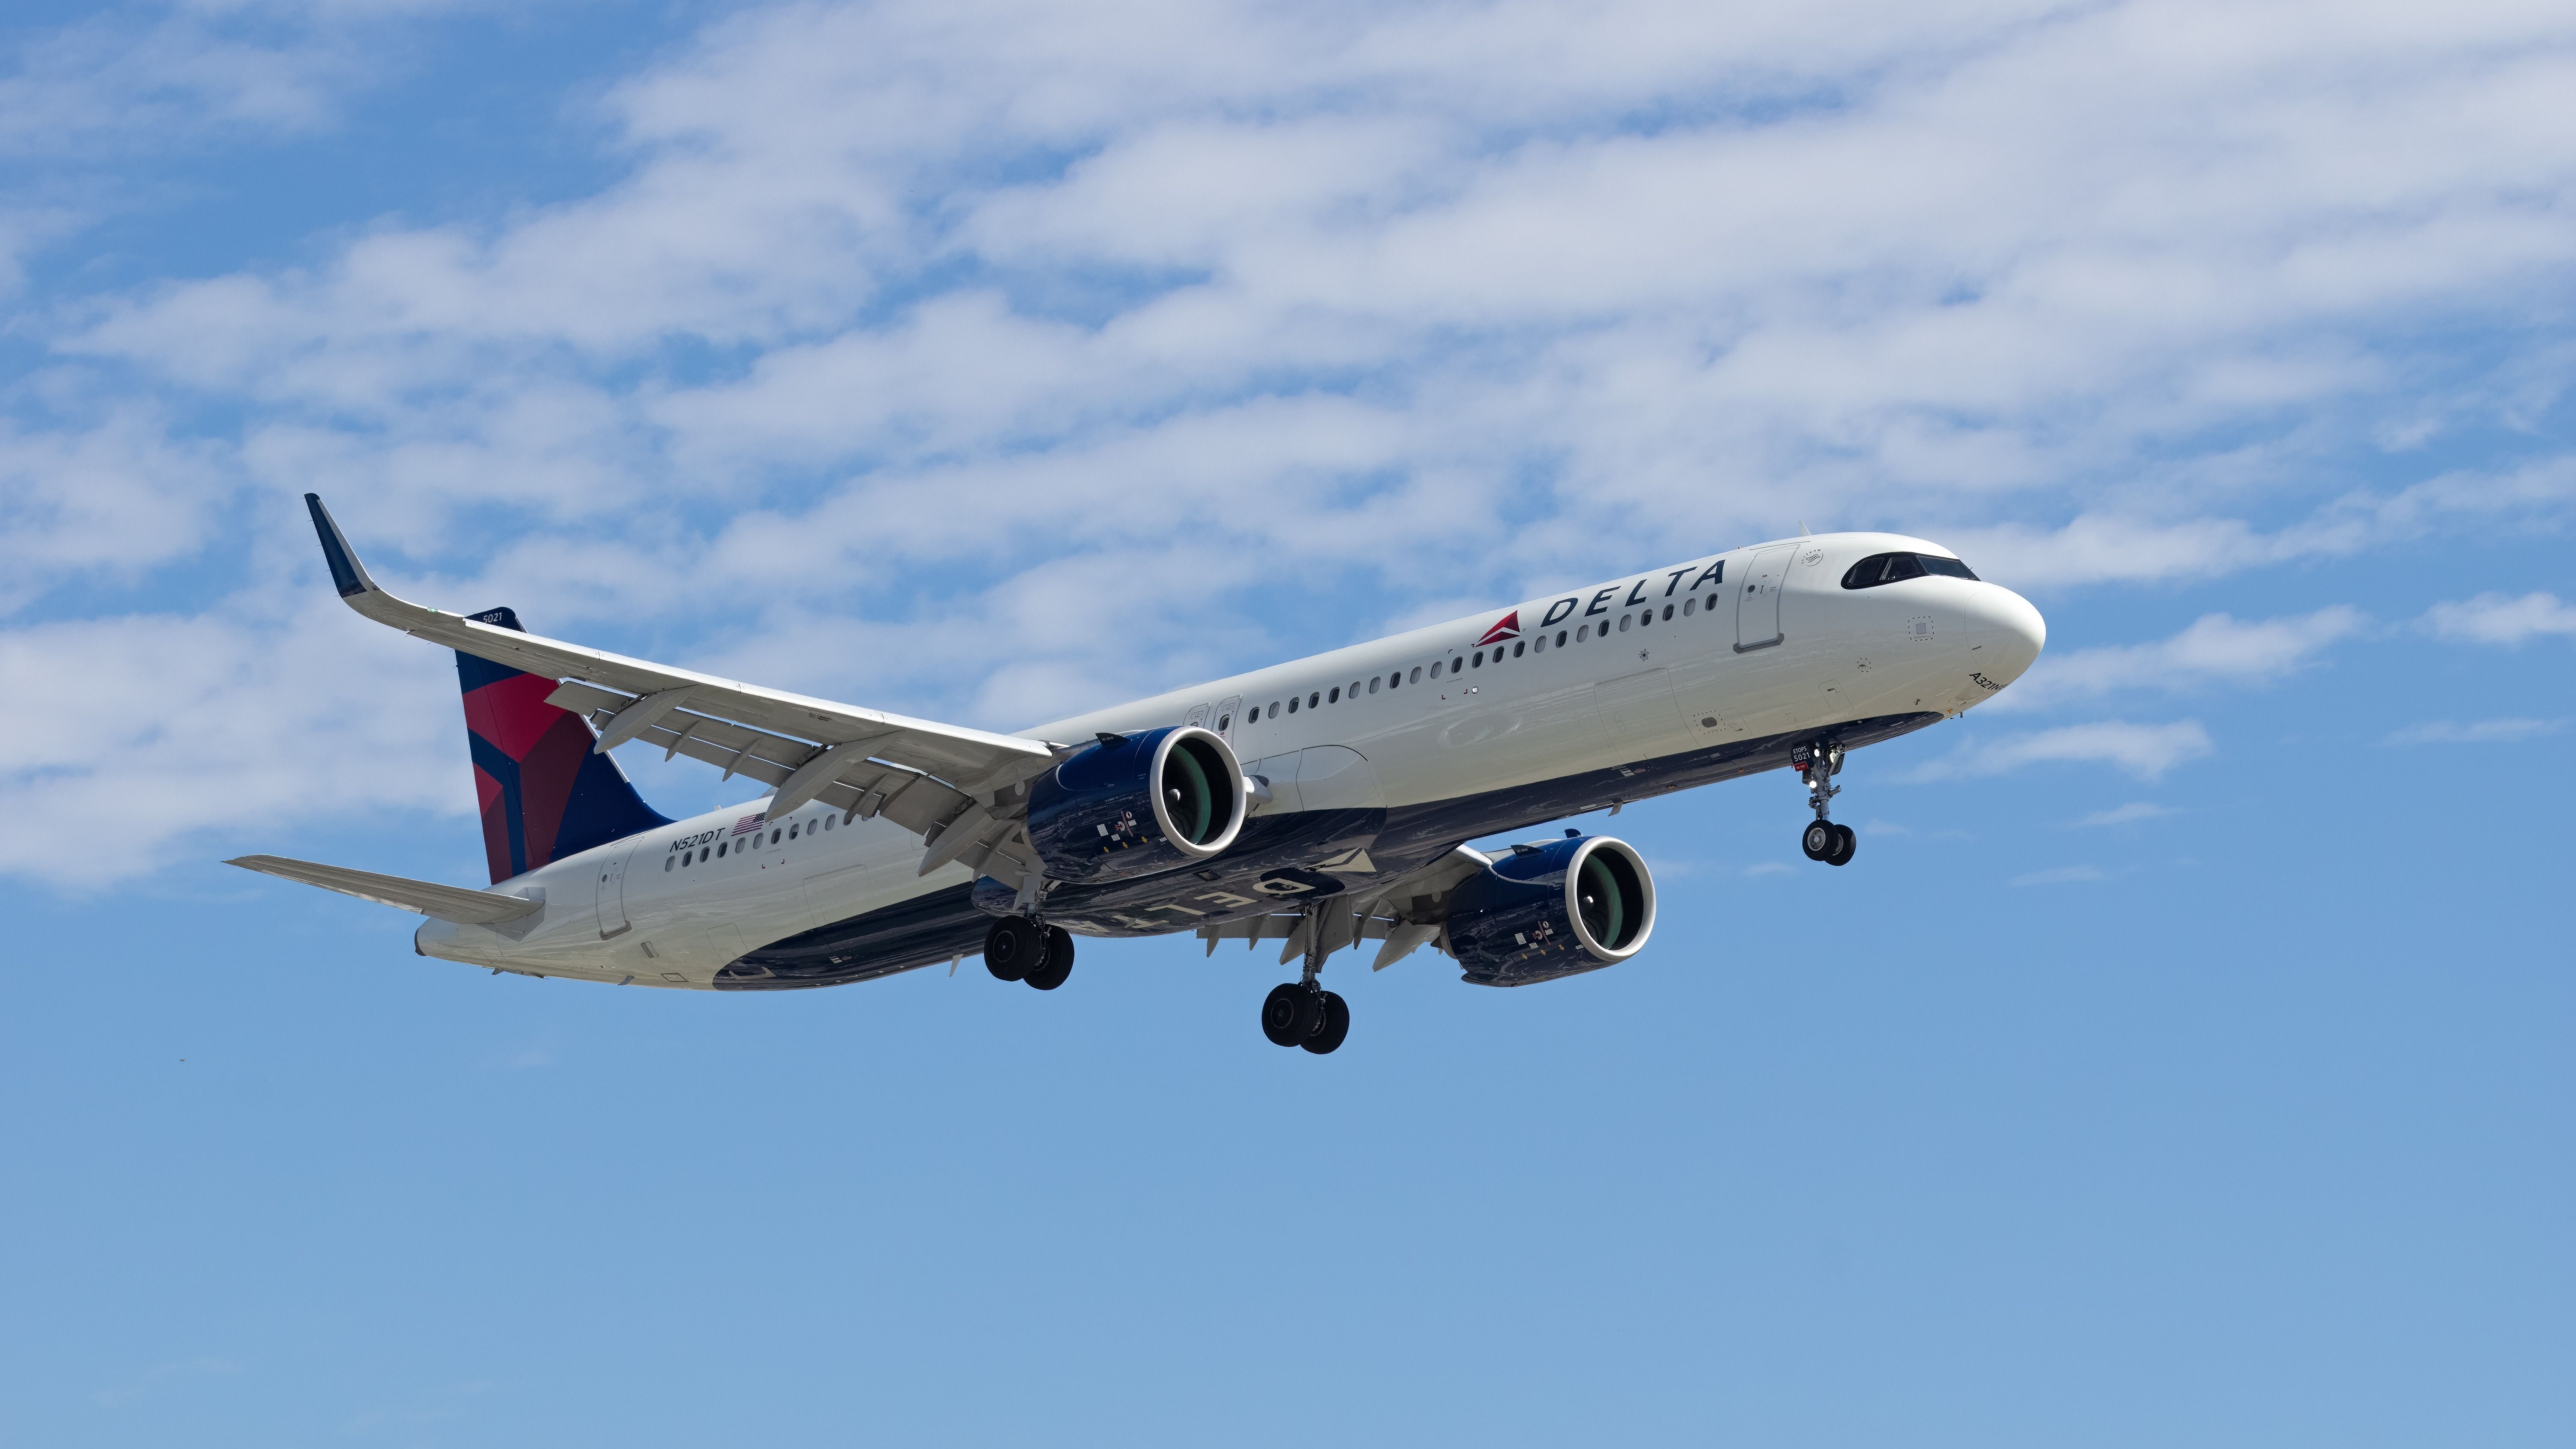 Delta Air Lines Airbus A321neo (N512DT) on approach at Los Angeles International Airport.